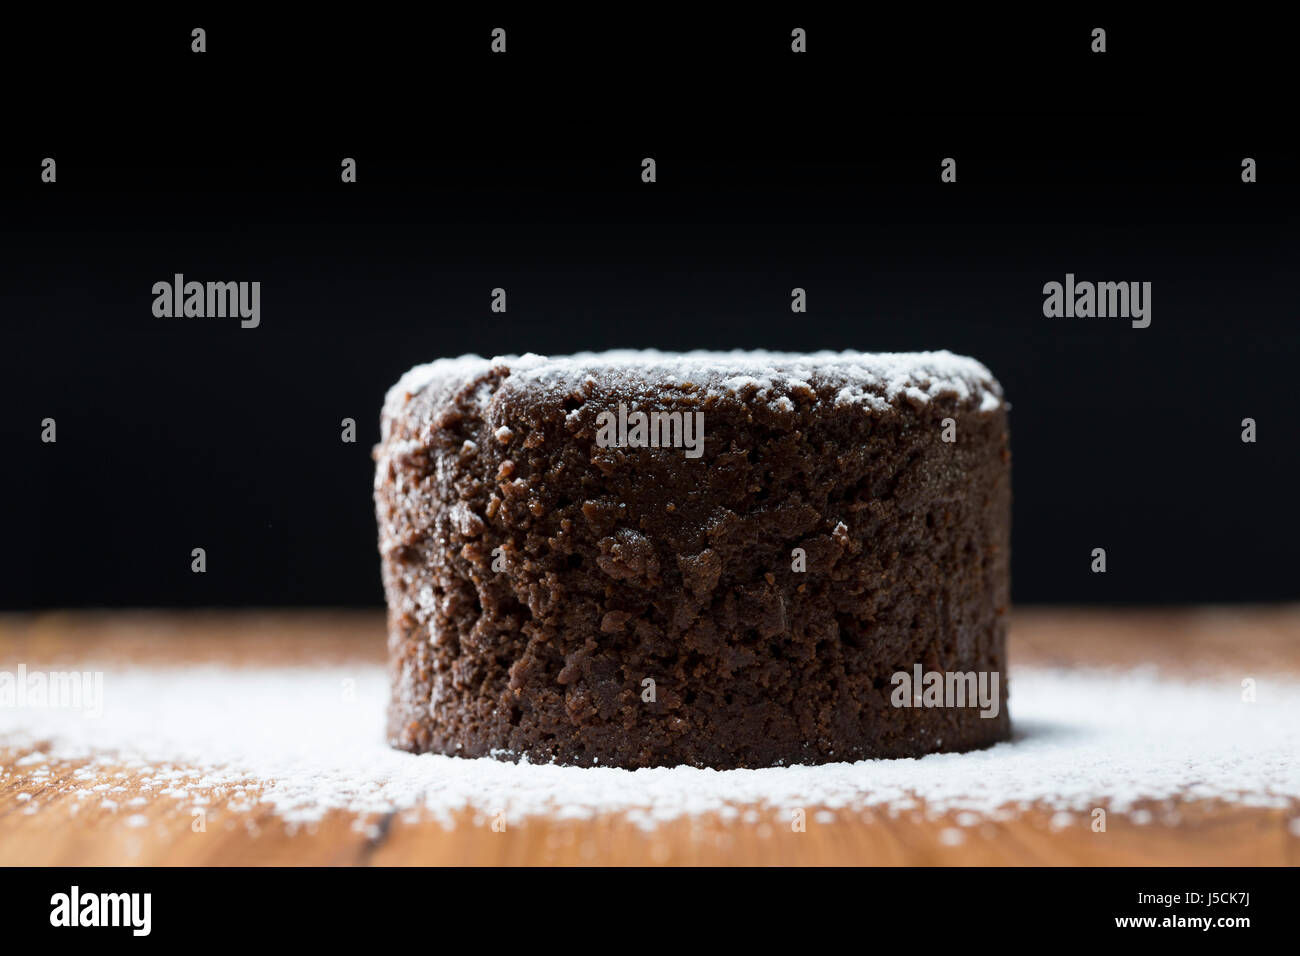 Chocolate Lava Cake with icing sugar. Chocolate pudding sitting on a rustic wooden table. Stock Photo